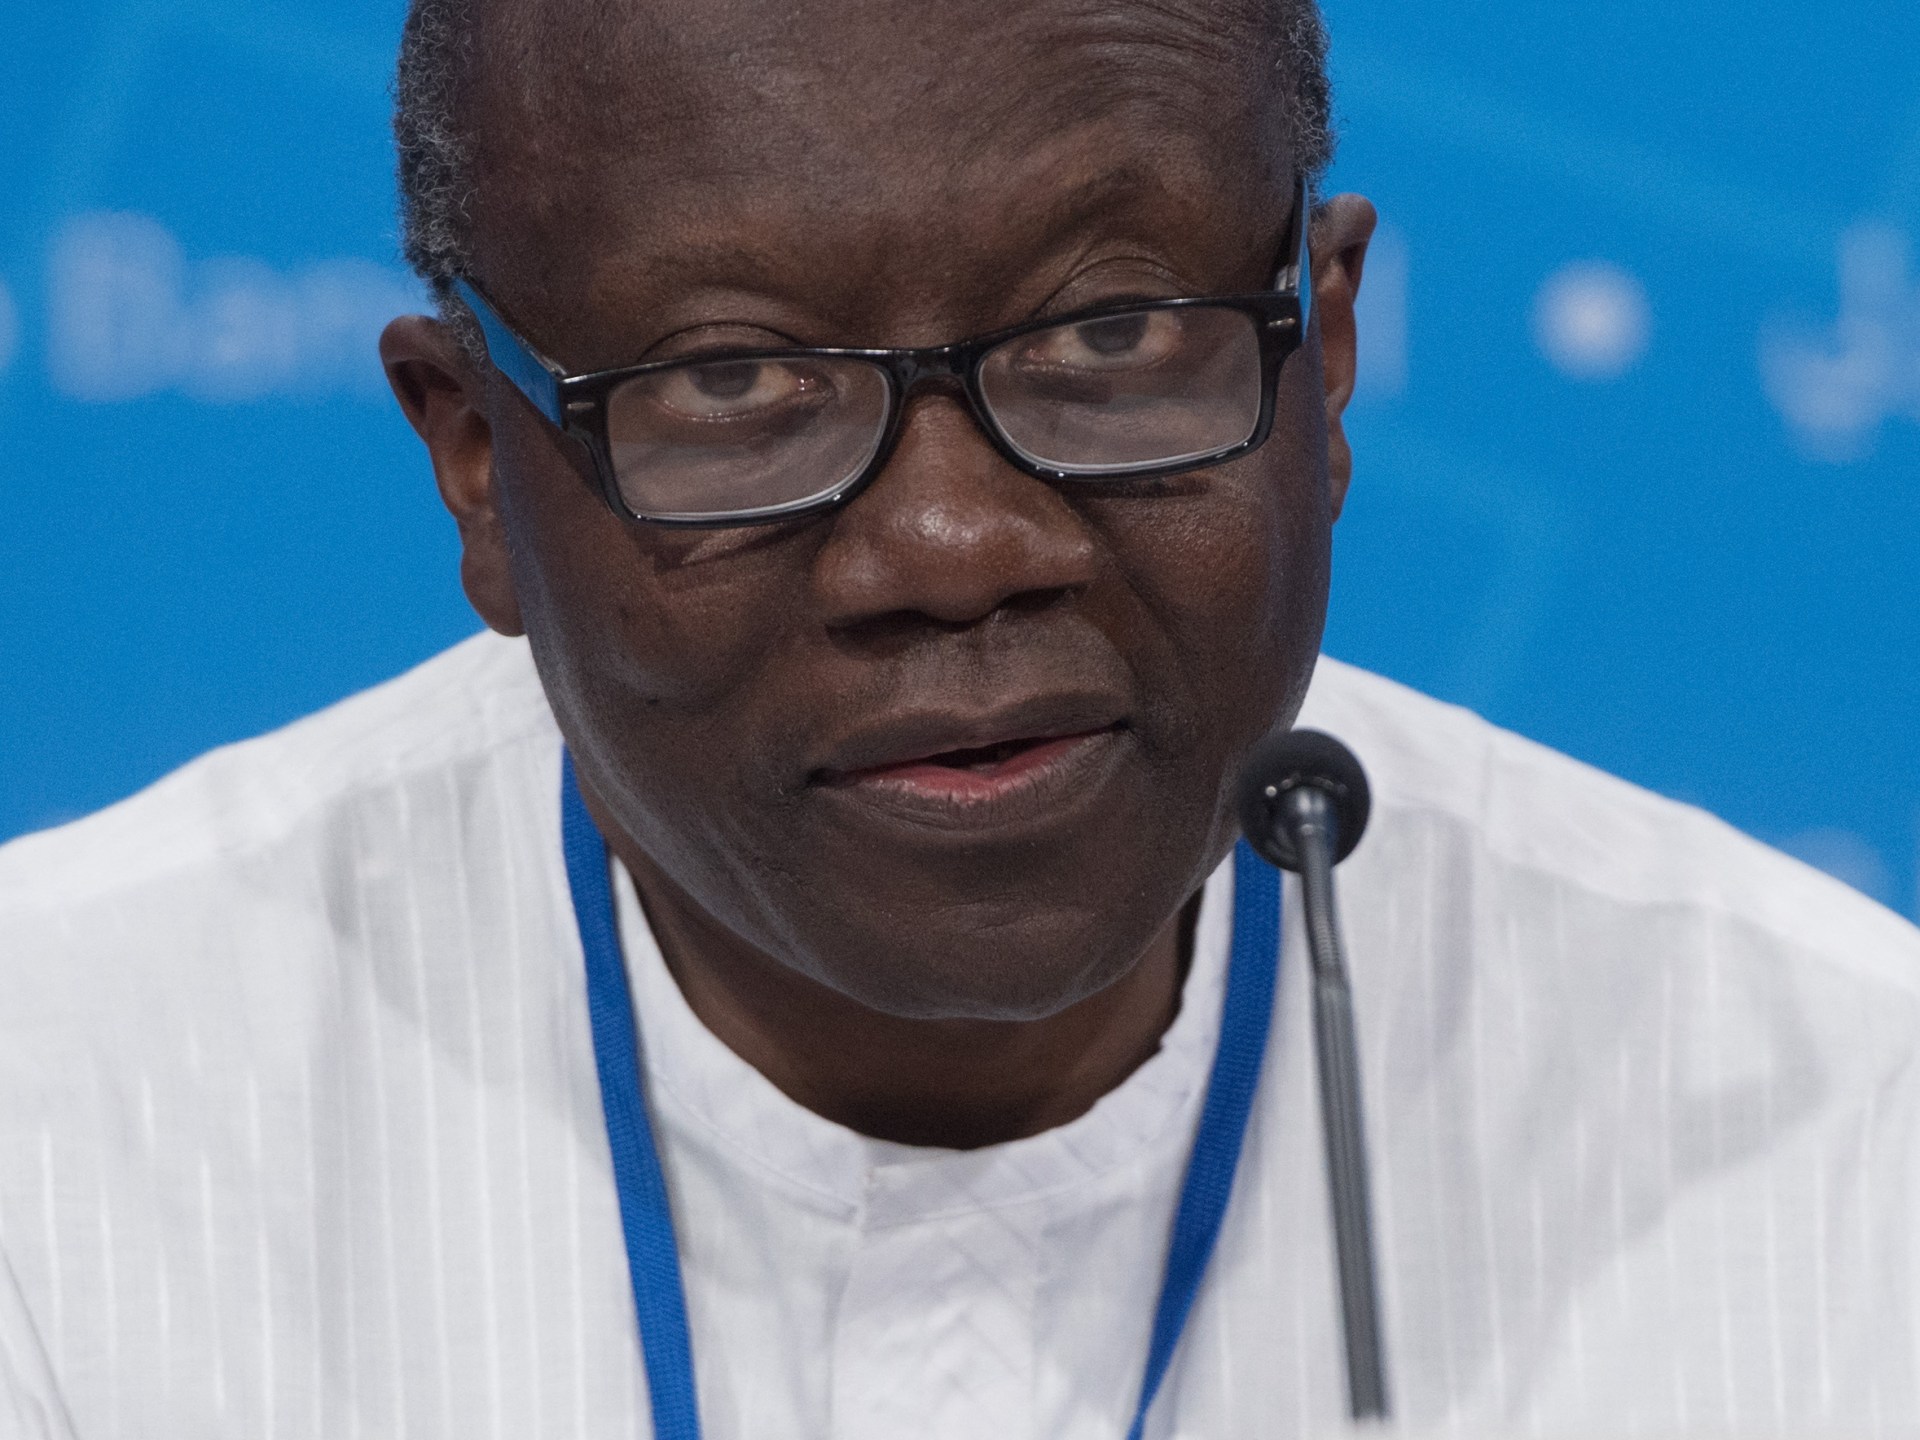 Ghana minister ‘sorry’ for financial disaster, fends off criticism